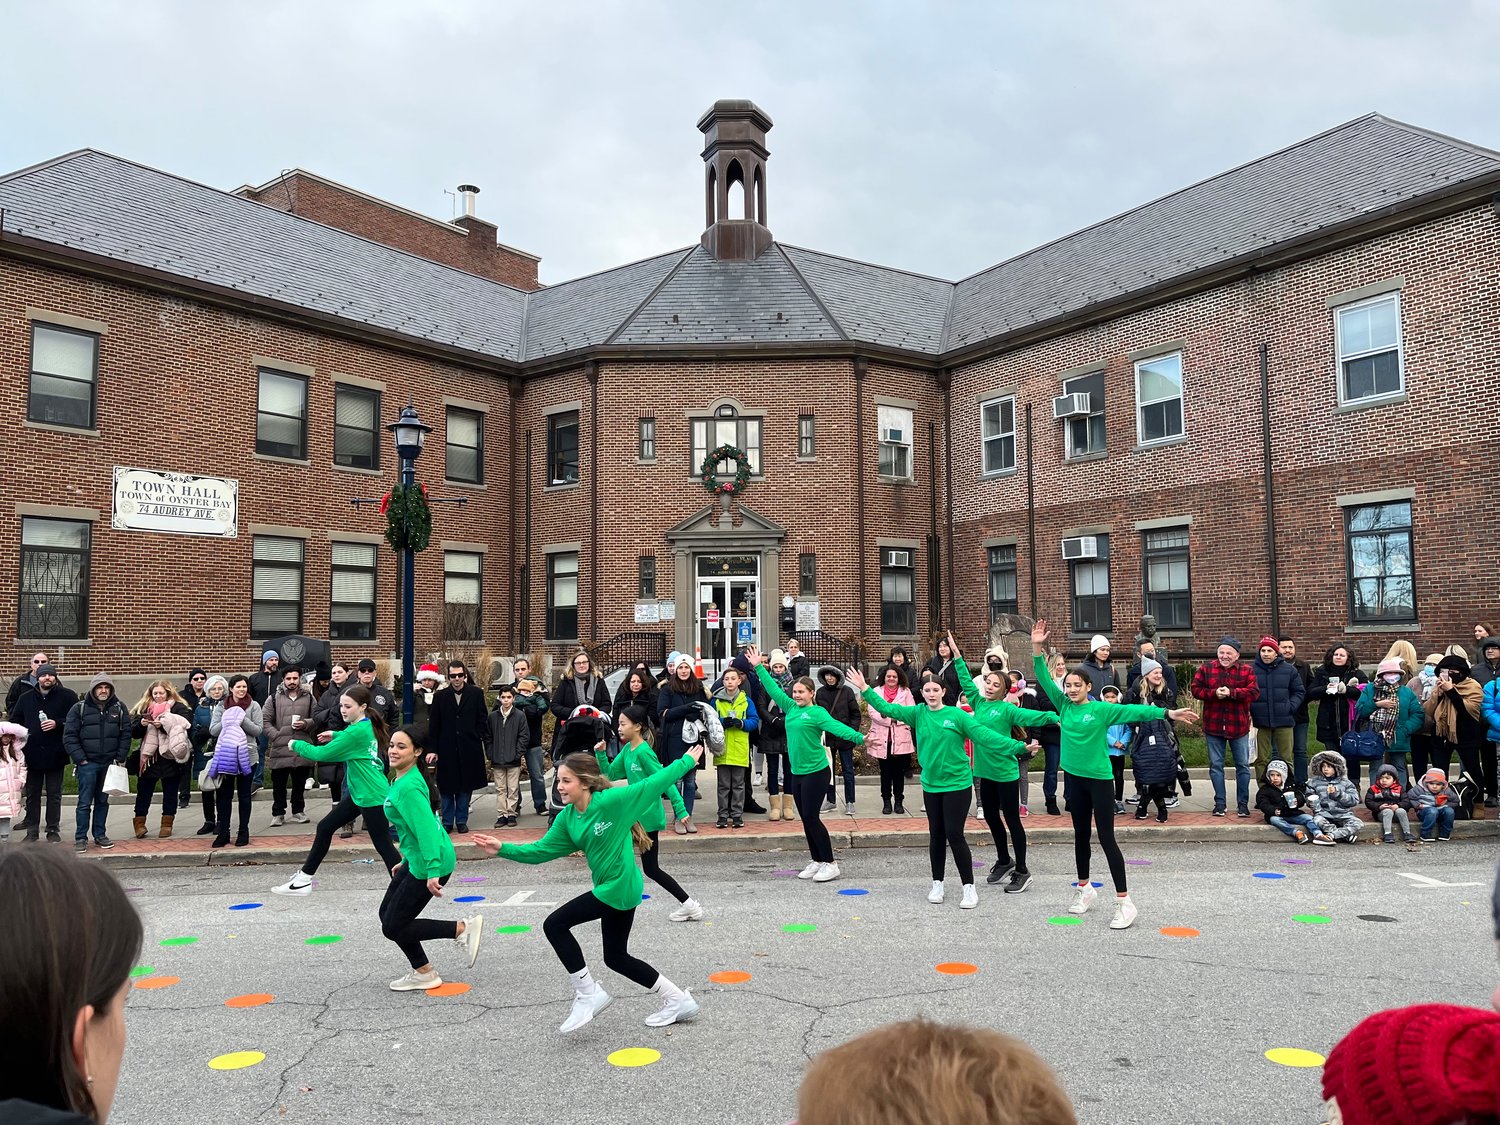 The young performers from the Gone Dancing school in Oyster Bay wowed attendees with their moves at the Holiday Stroll and Christmas Tree Lighting in the hamlet.